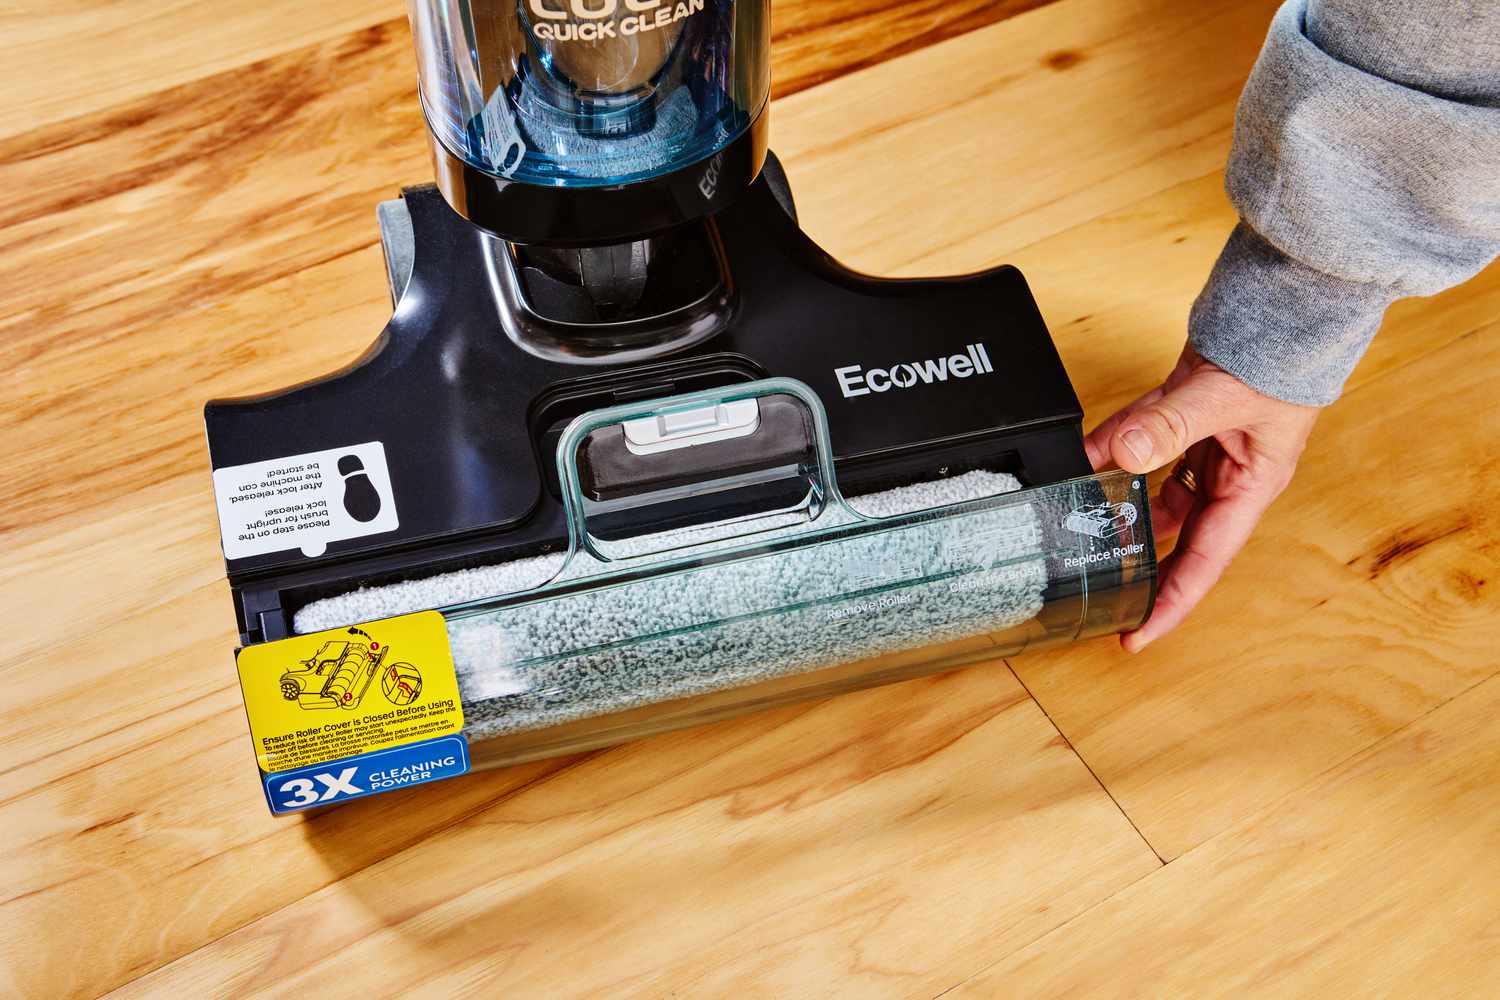 A hand lifting a glass opening to the mop pad of the Ecowell Lulu Quick Clean P05 Wet Dry Vacuum